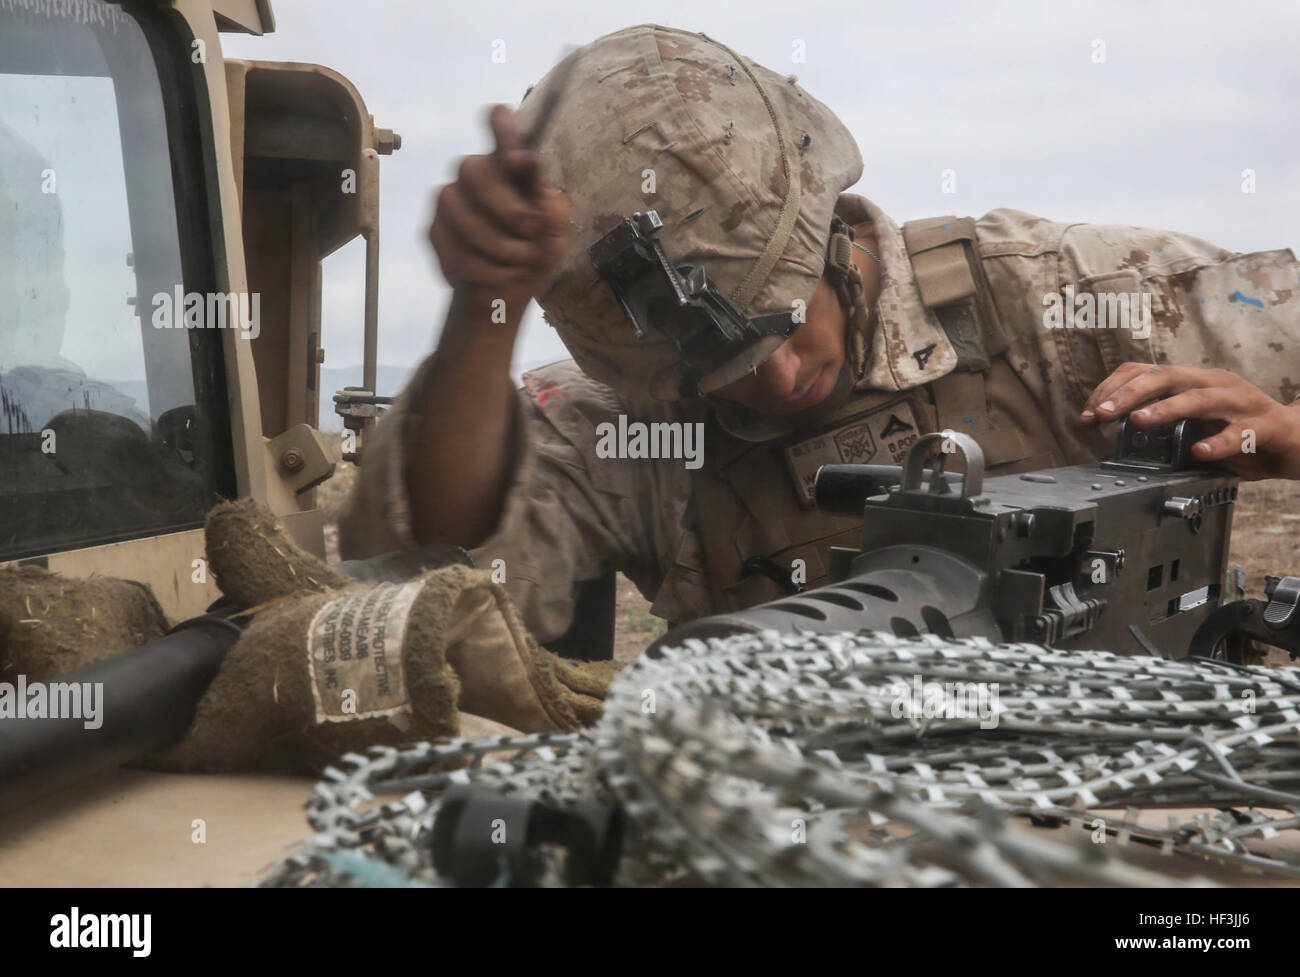 Lance Cpl. Jay Singh, a U.S. Marine with the Combined Anti-Armor Team (CAAT) within Battalion Landing Team (BLT) 2/1, the ground combat element for the 13th Marine Expeditionary Unit, performs maintenance on an M2 .50-Caliber machine gun during training on Aug. 21, 2015. The CAAT, composed of heavy machine gunners and anti-tank missilemen, is used to combat hardened targets as well as provide security. (U.S. Marine Corps photo by Sgt. Paris Capers /RELEASED) 13th MEU CAATs pack one-two punch 150822-M-NI439-093 Stock Photo